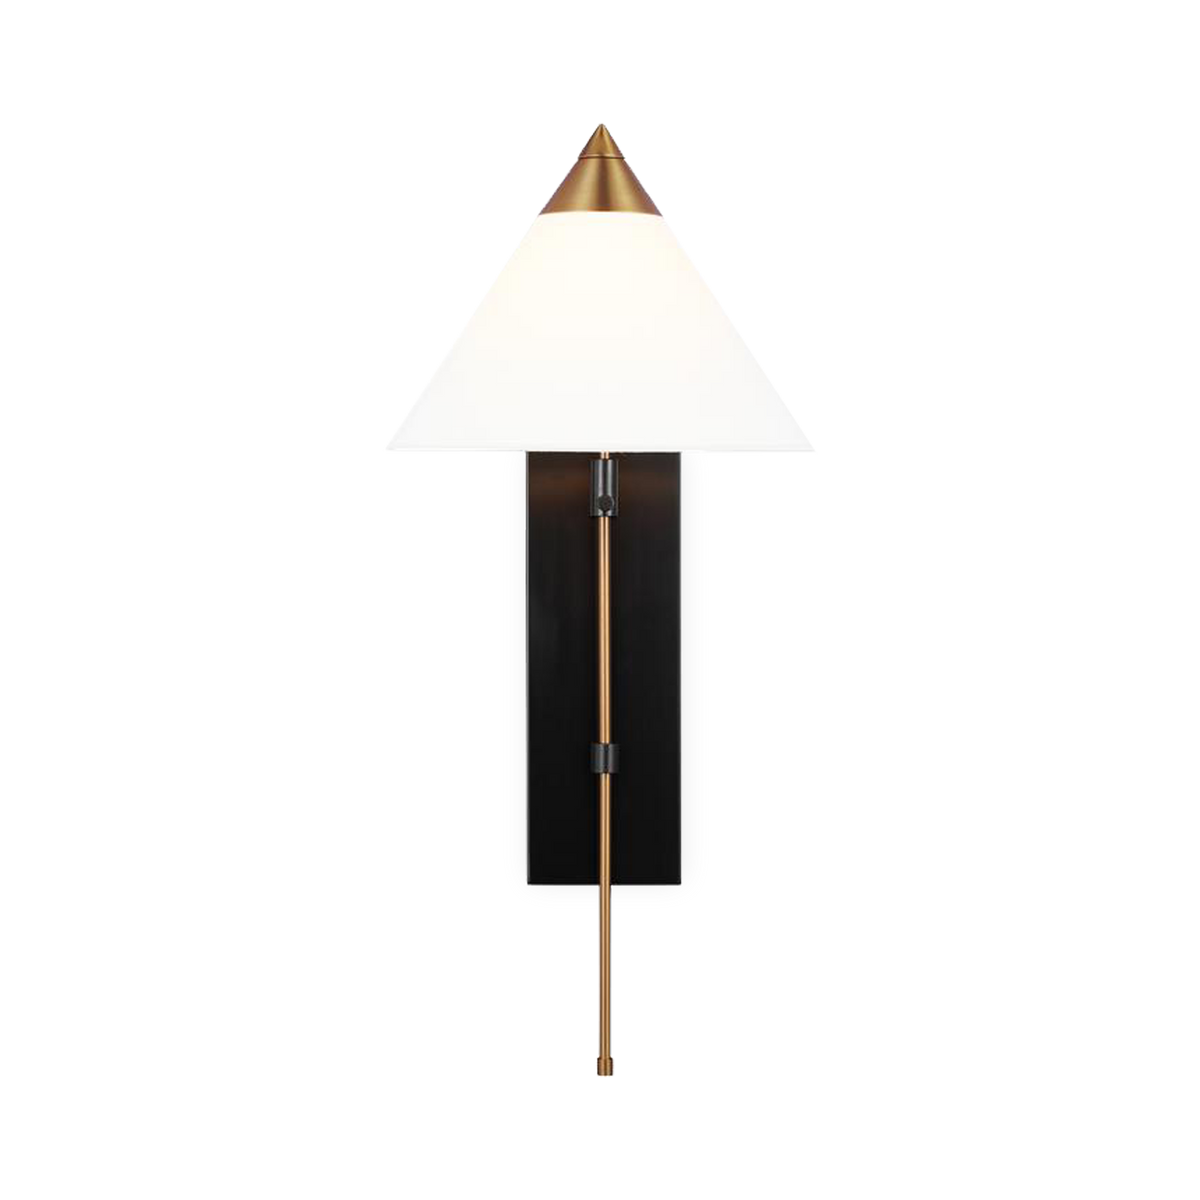 The Franklin Wall Light features a white linen shade with a brass and bronze finish.